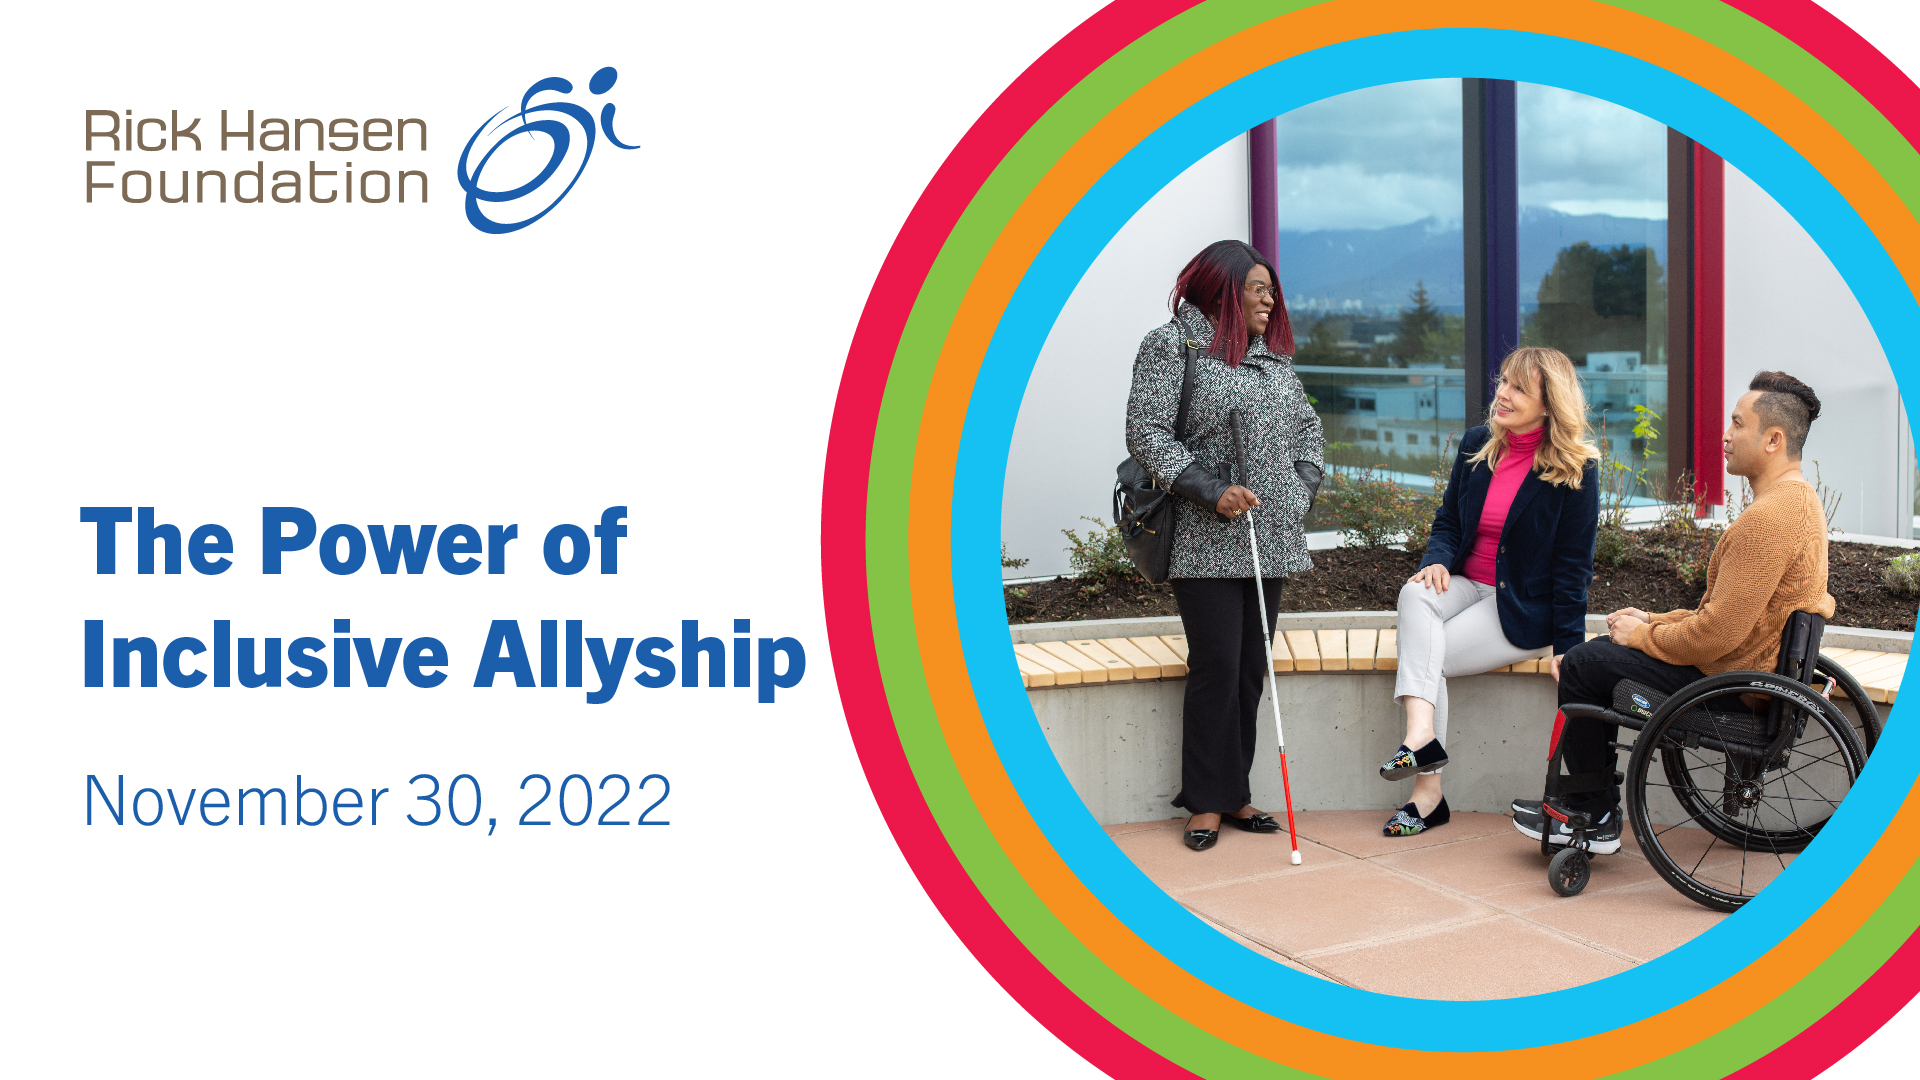 The Power of Inclusive Allyship November 30, 2022 is written in blue against a white background. There is a circle with colourful rings to the right with an image of three people with different abilities inside. The Rick Hansen Foundation logo is in the top left corner.